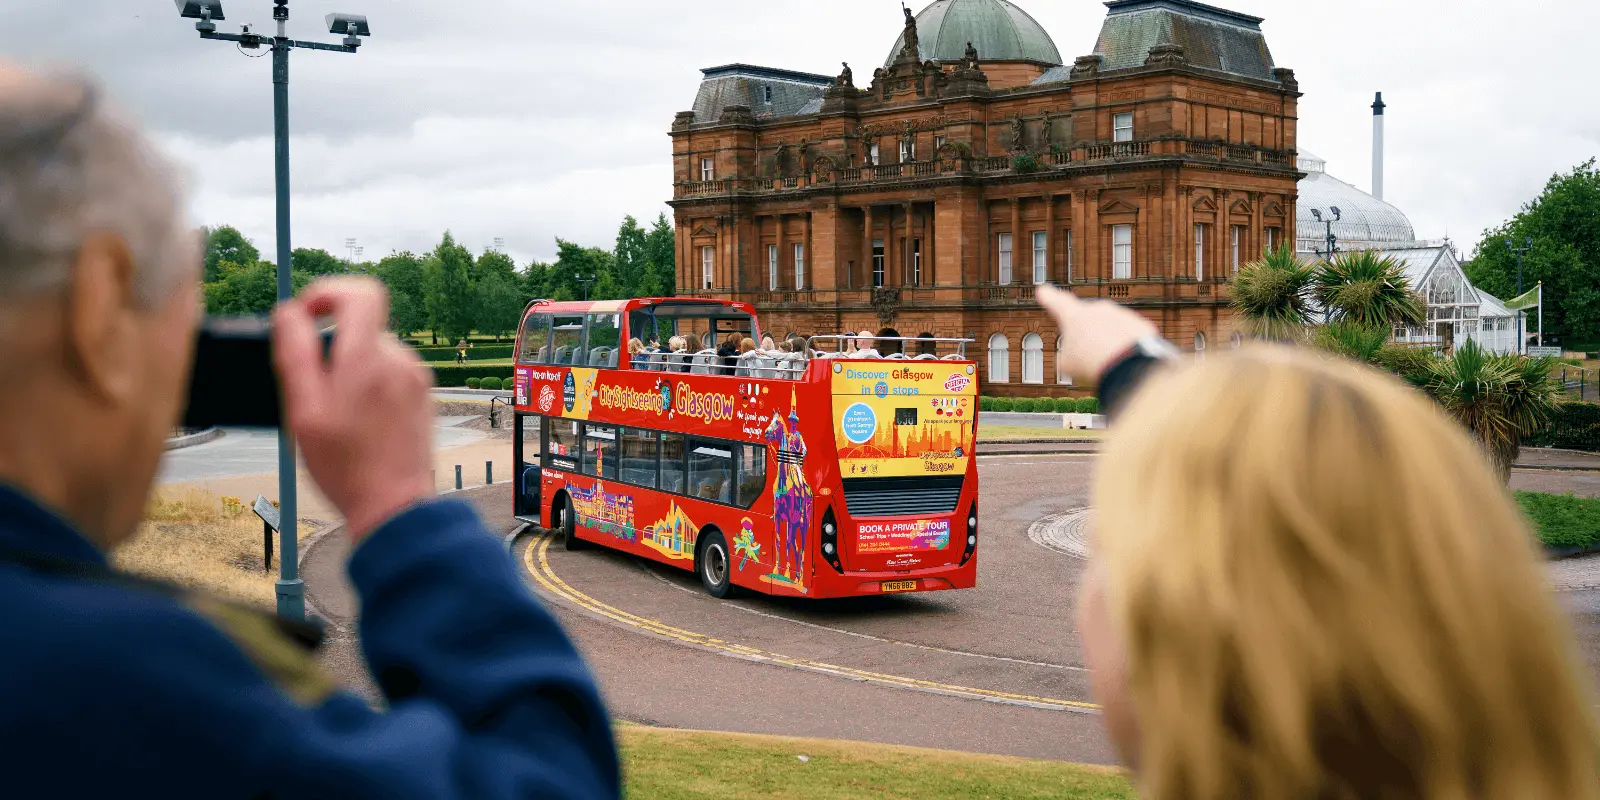 City Sightseeing bus in front of Kelvingrove